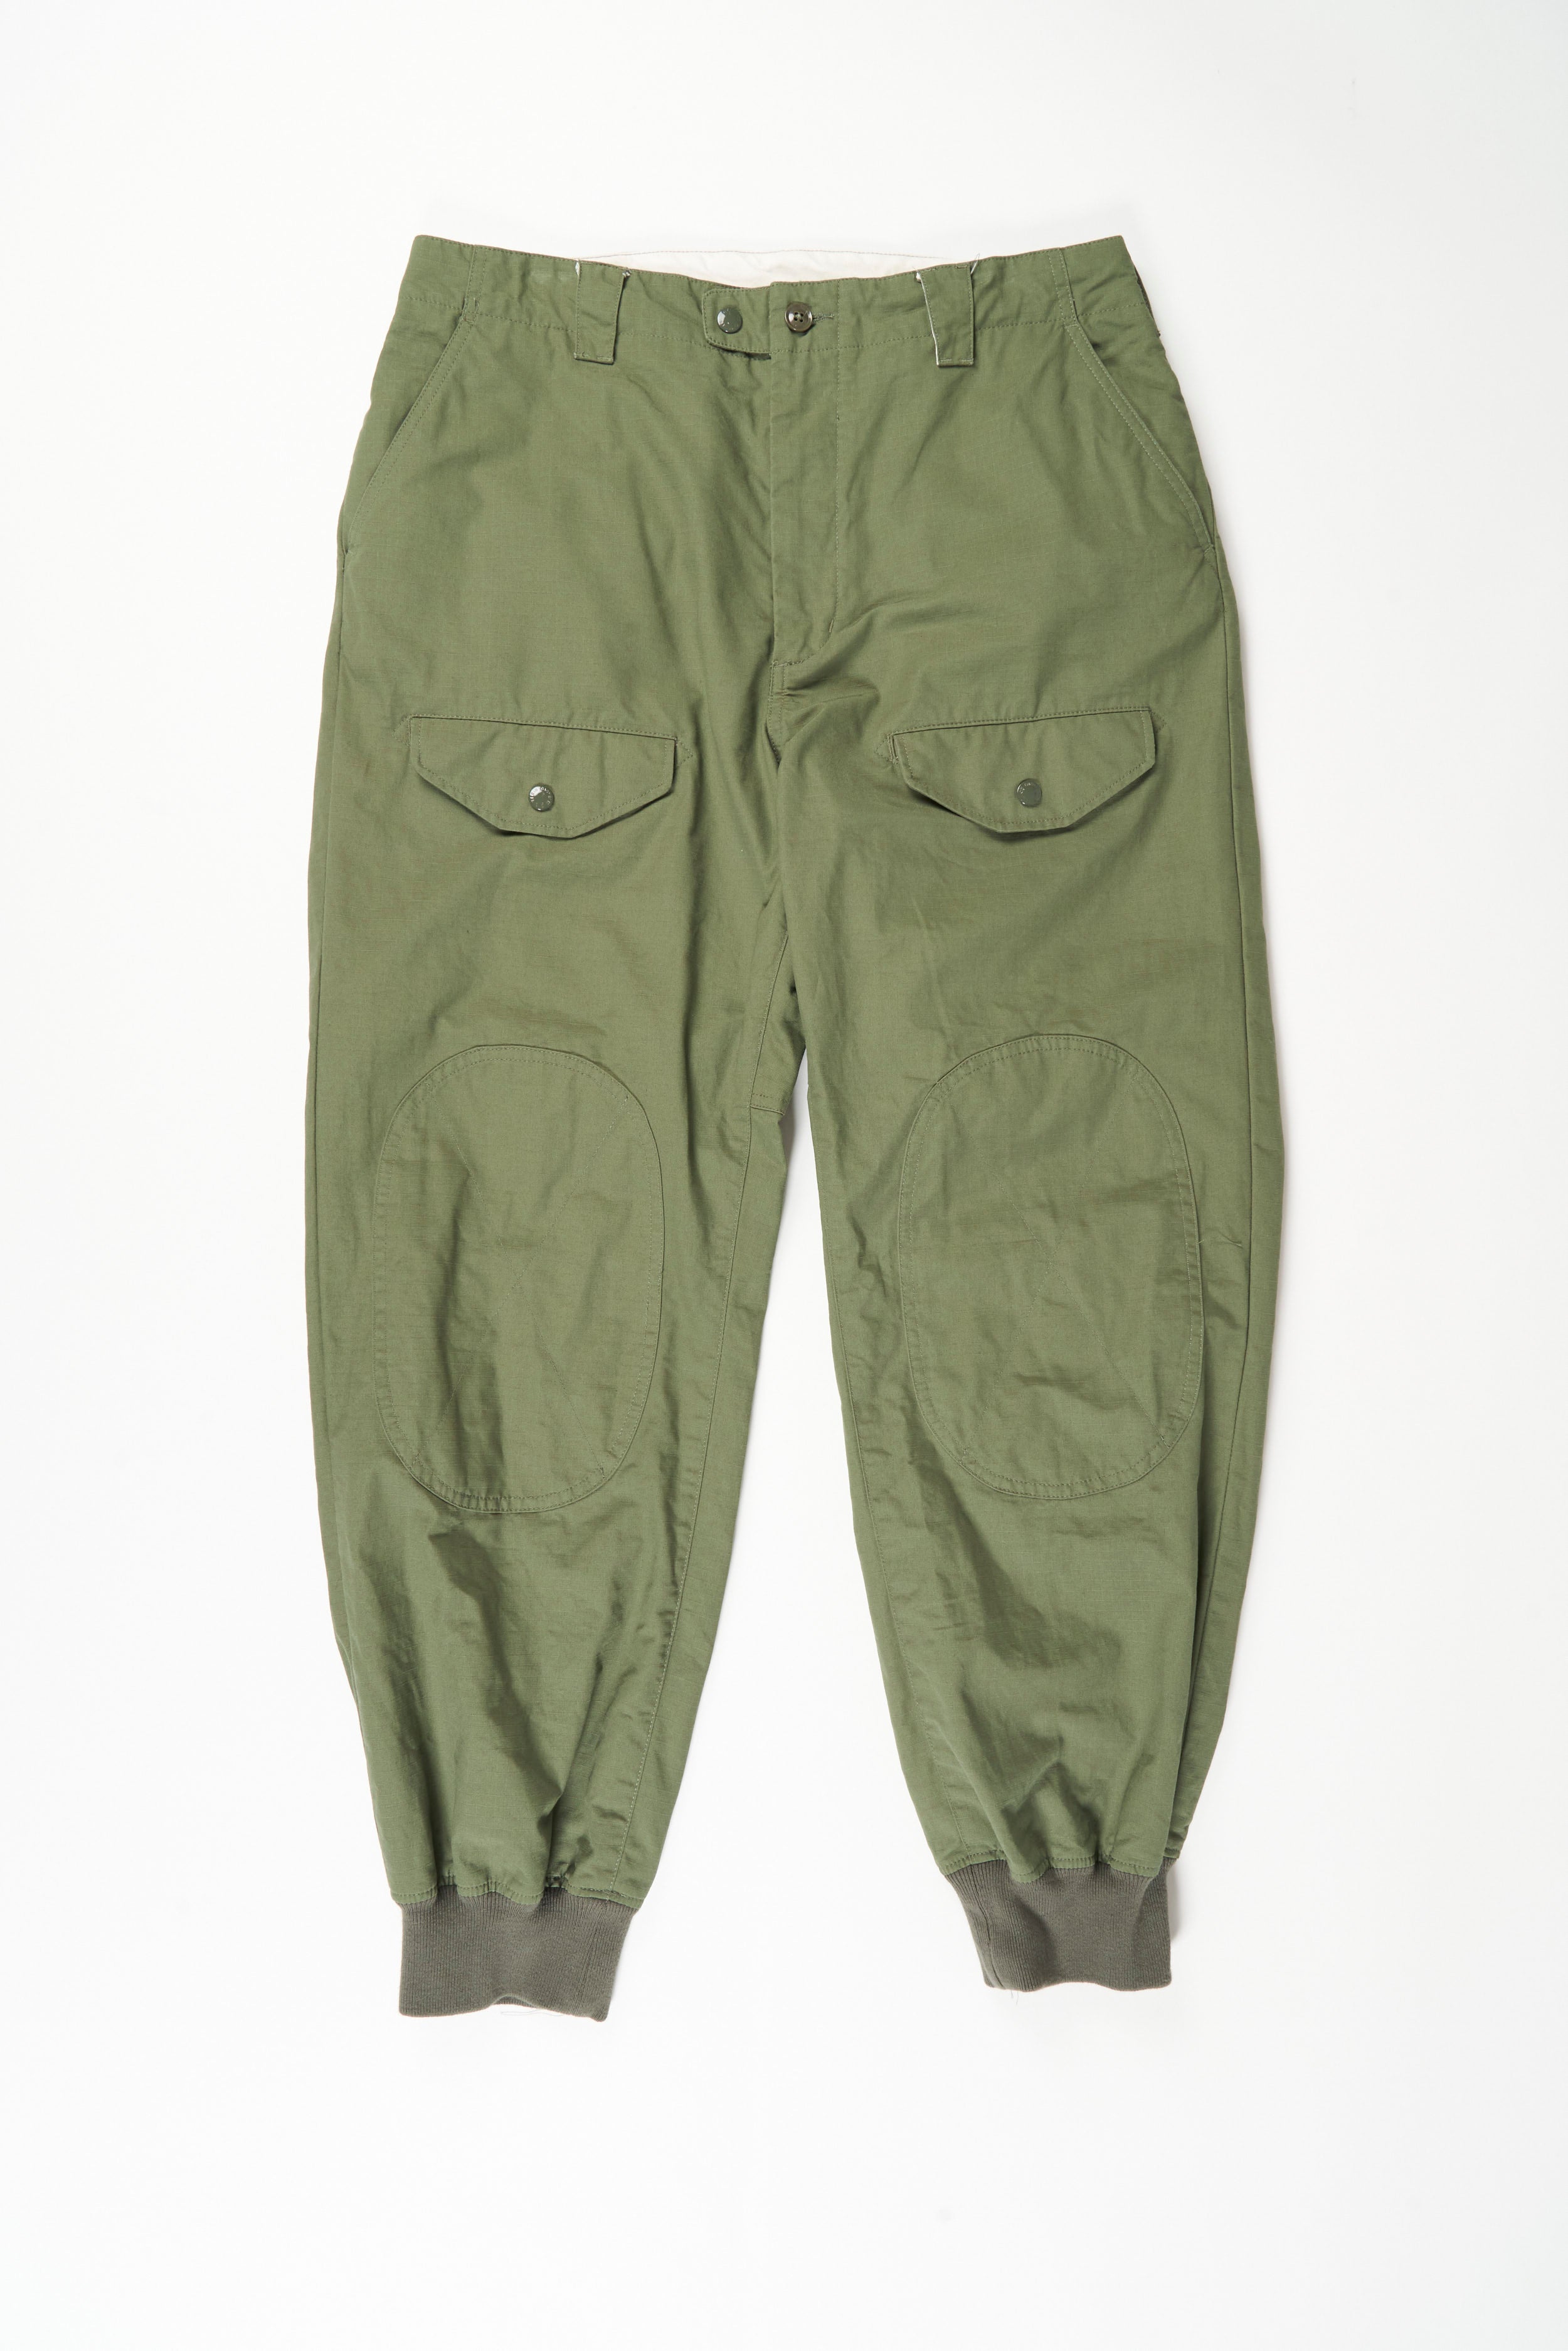 Airborne Pant - Olive Cotton Ripstop